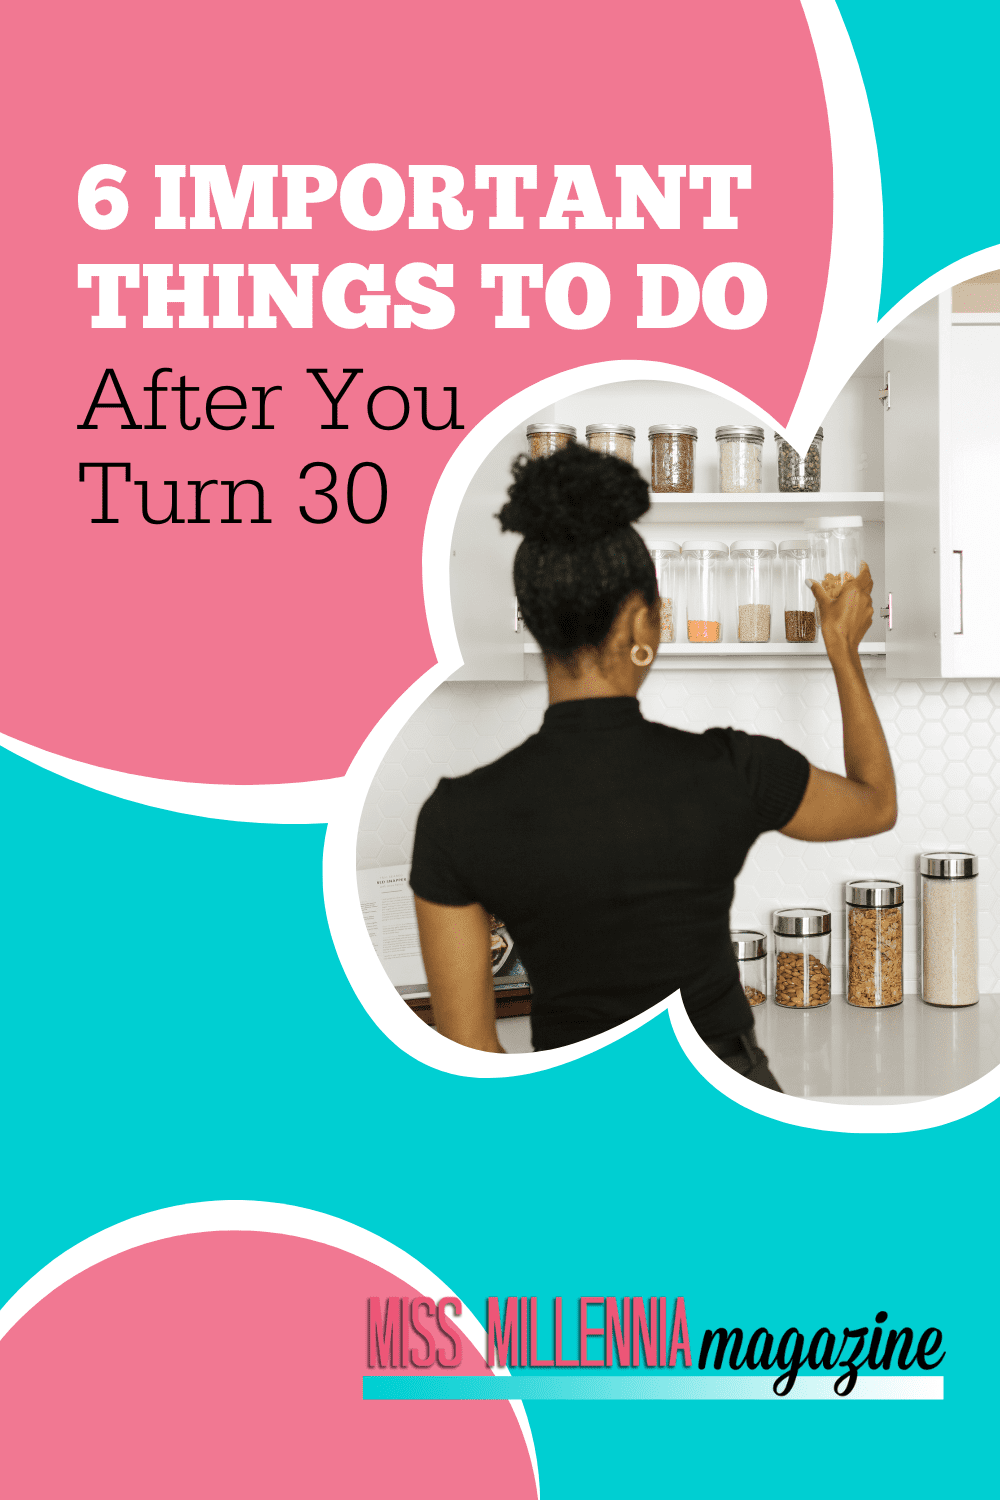 6 Important Things To Do After You Turn 30